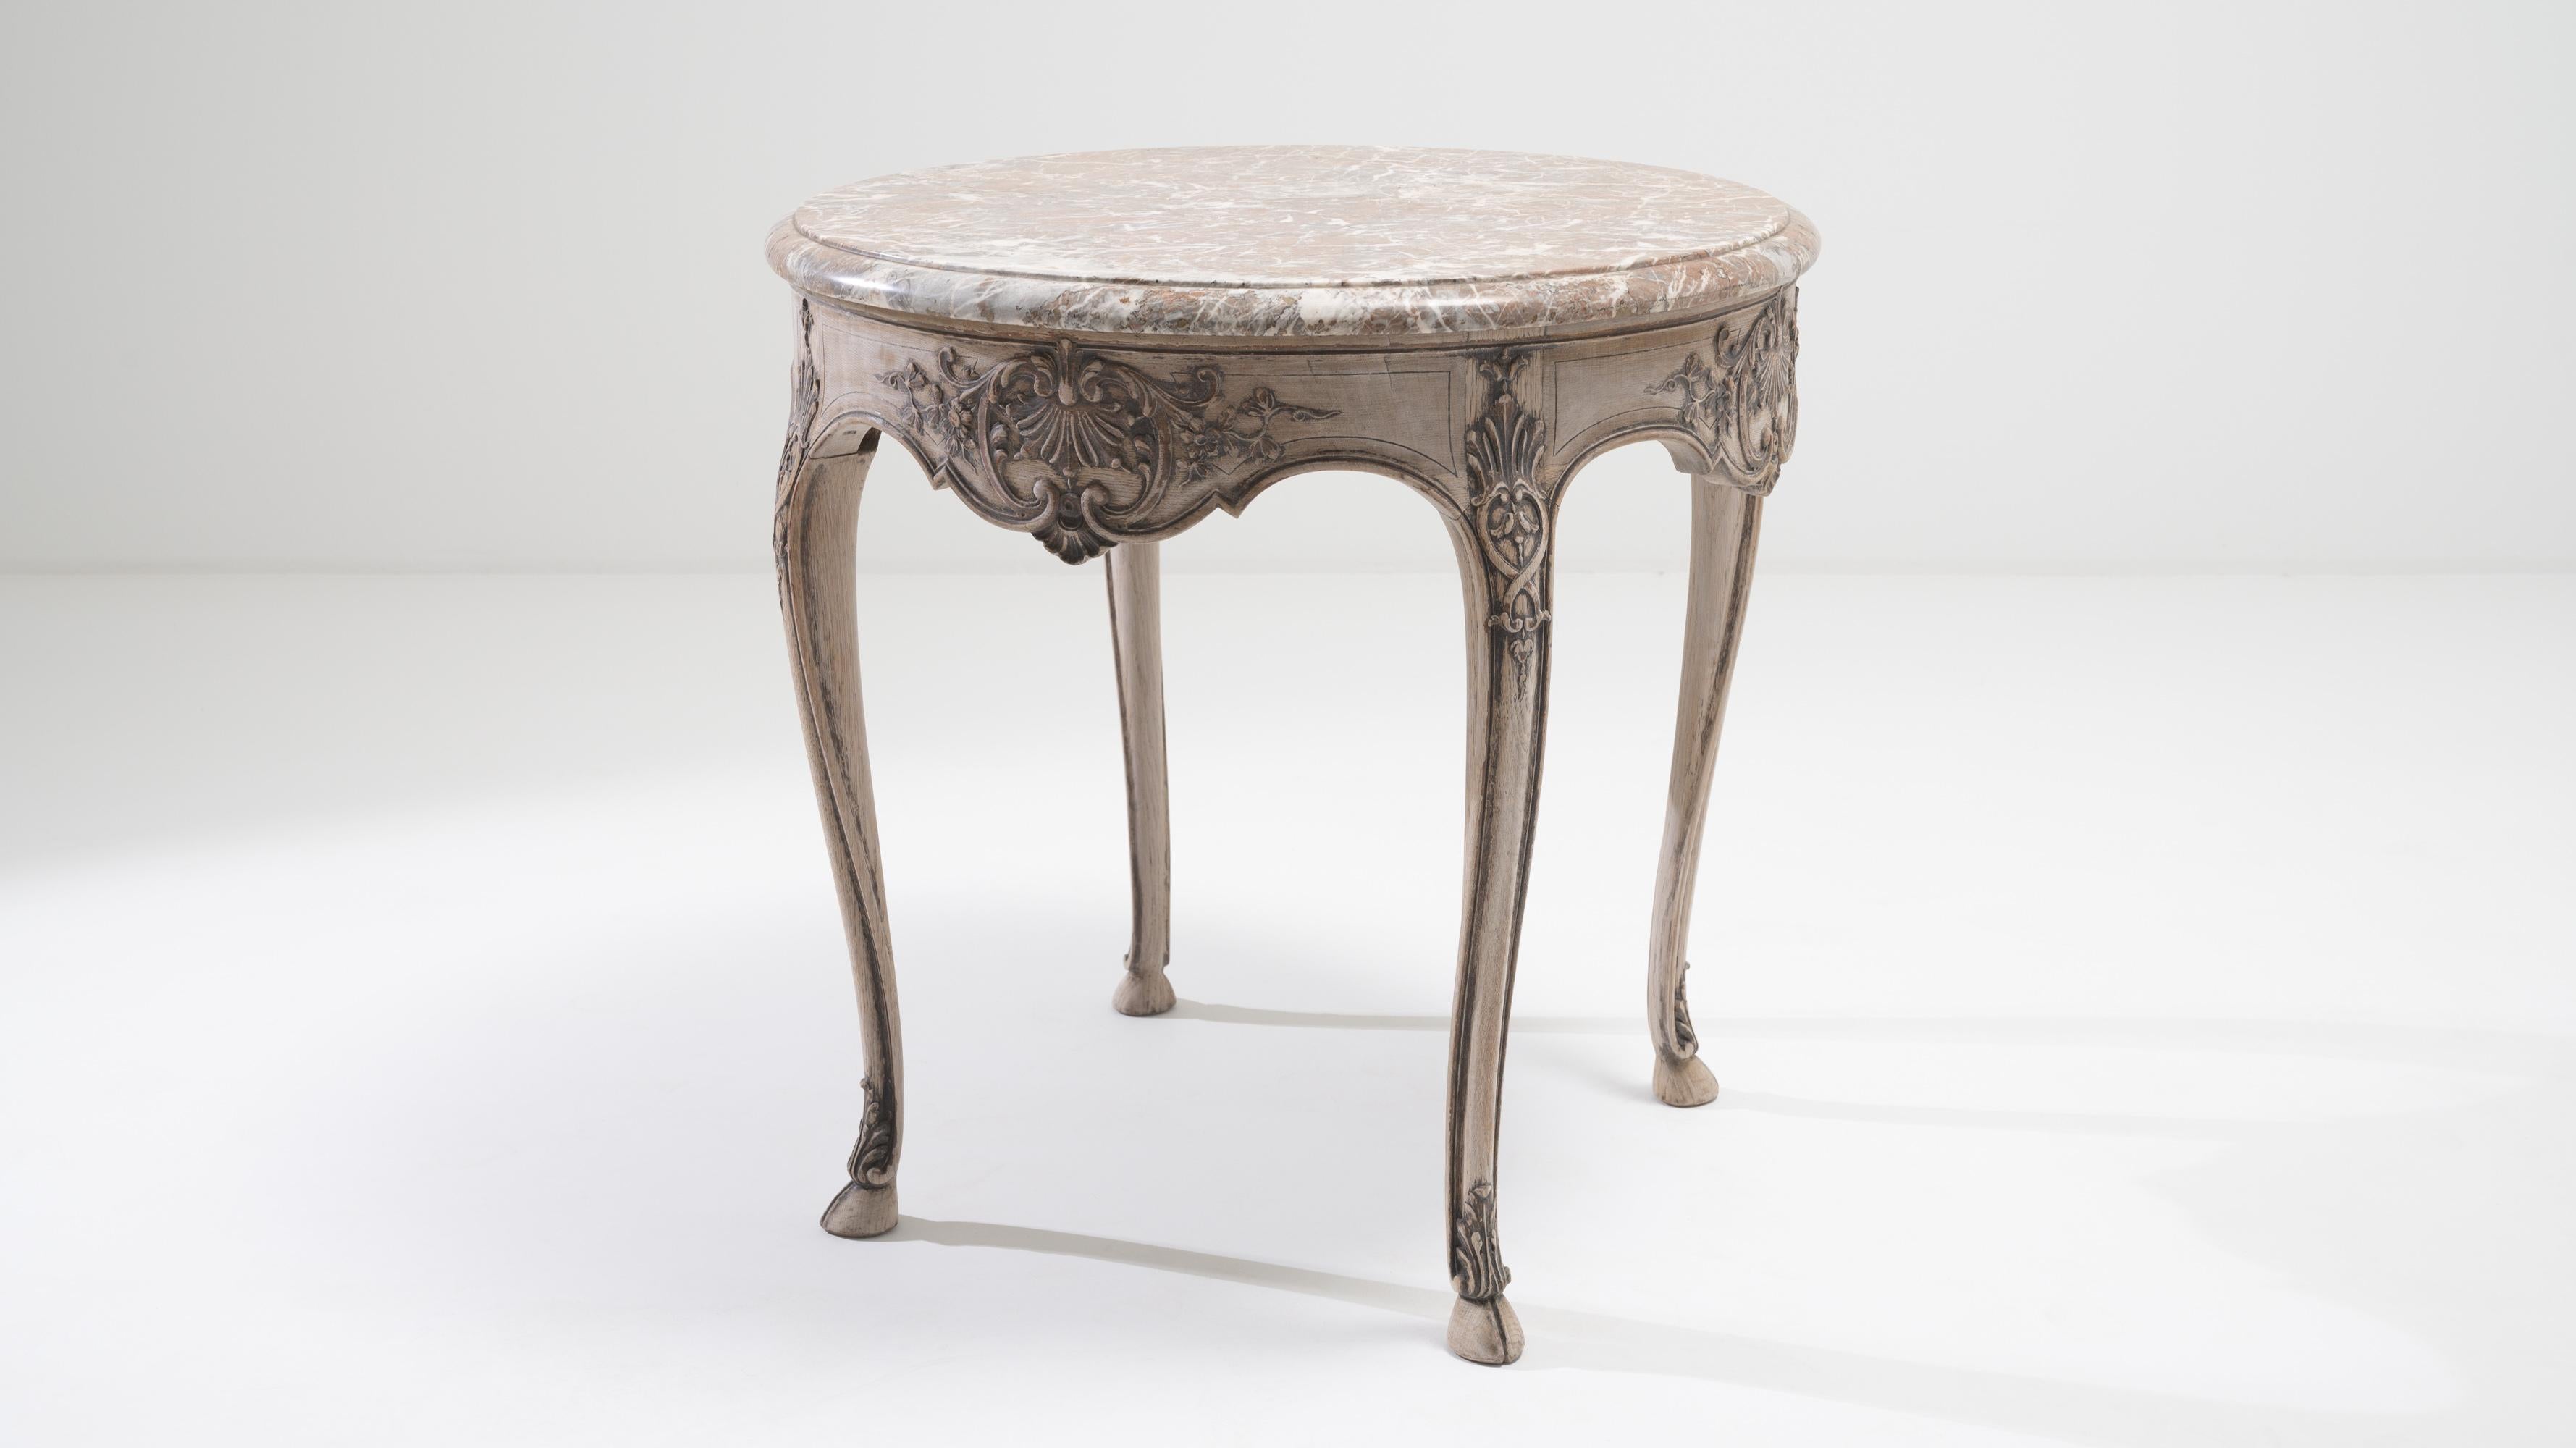 Indulge in the allure of the early 20th century with a Belgian Bleached Oak Side Table from the 1900s, showcasing exquisite Louis XV style. This charming table features a round marble top that adds a touch of luxury to its aesthetic. The bleached